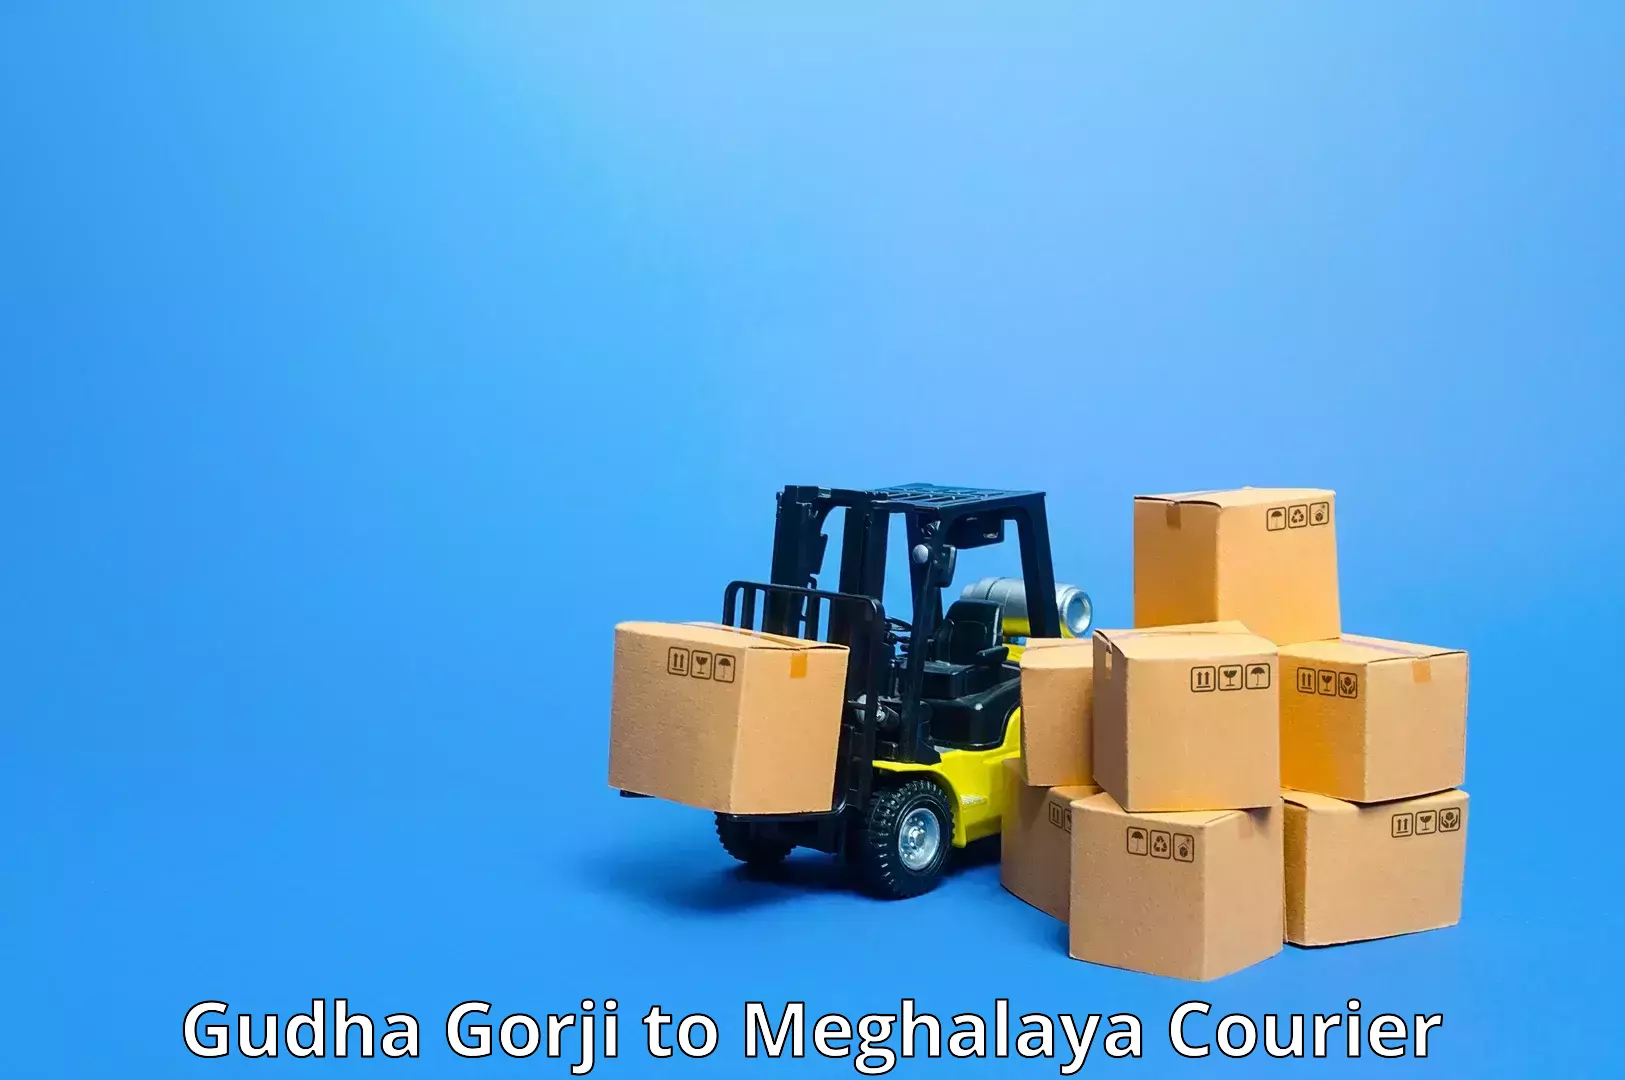 Secure freight services in Gudha Gorji to Shillong